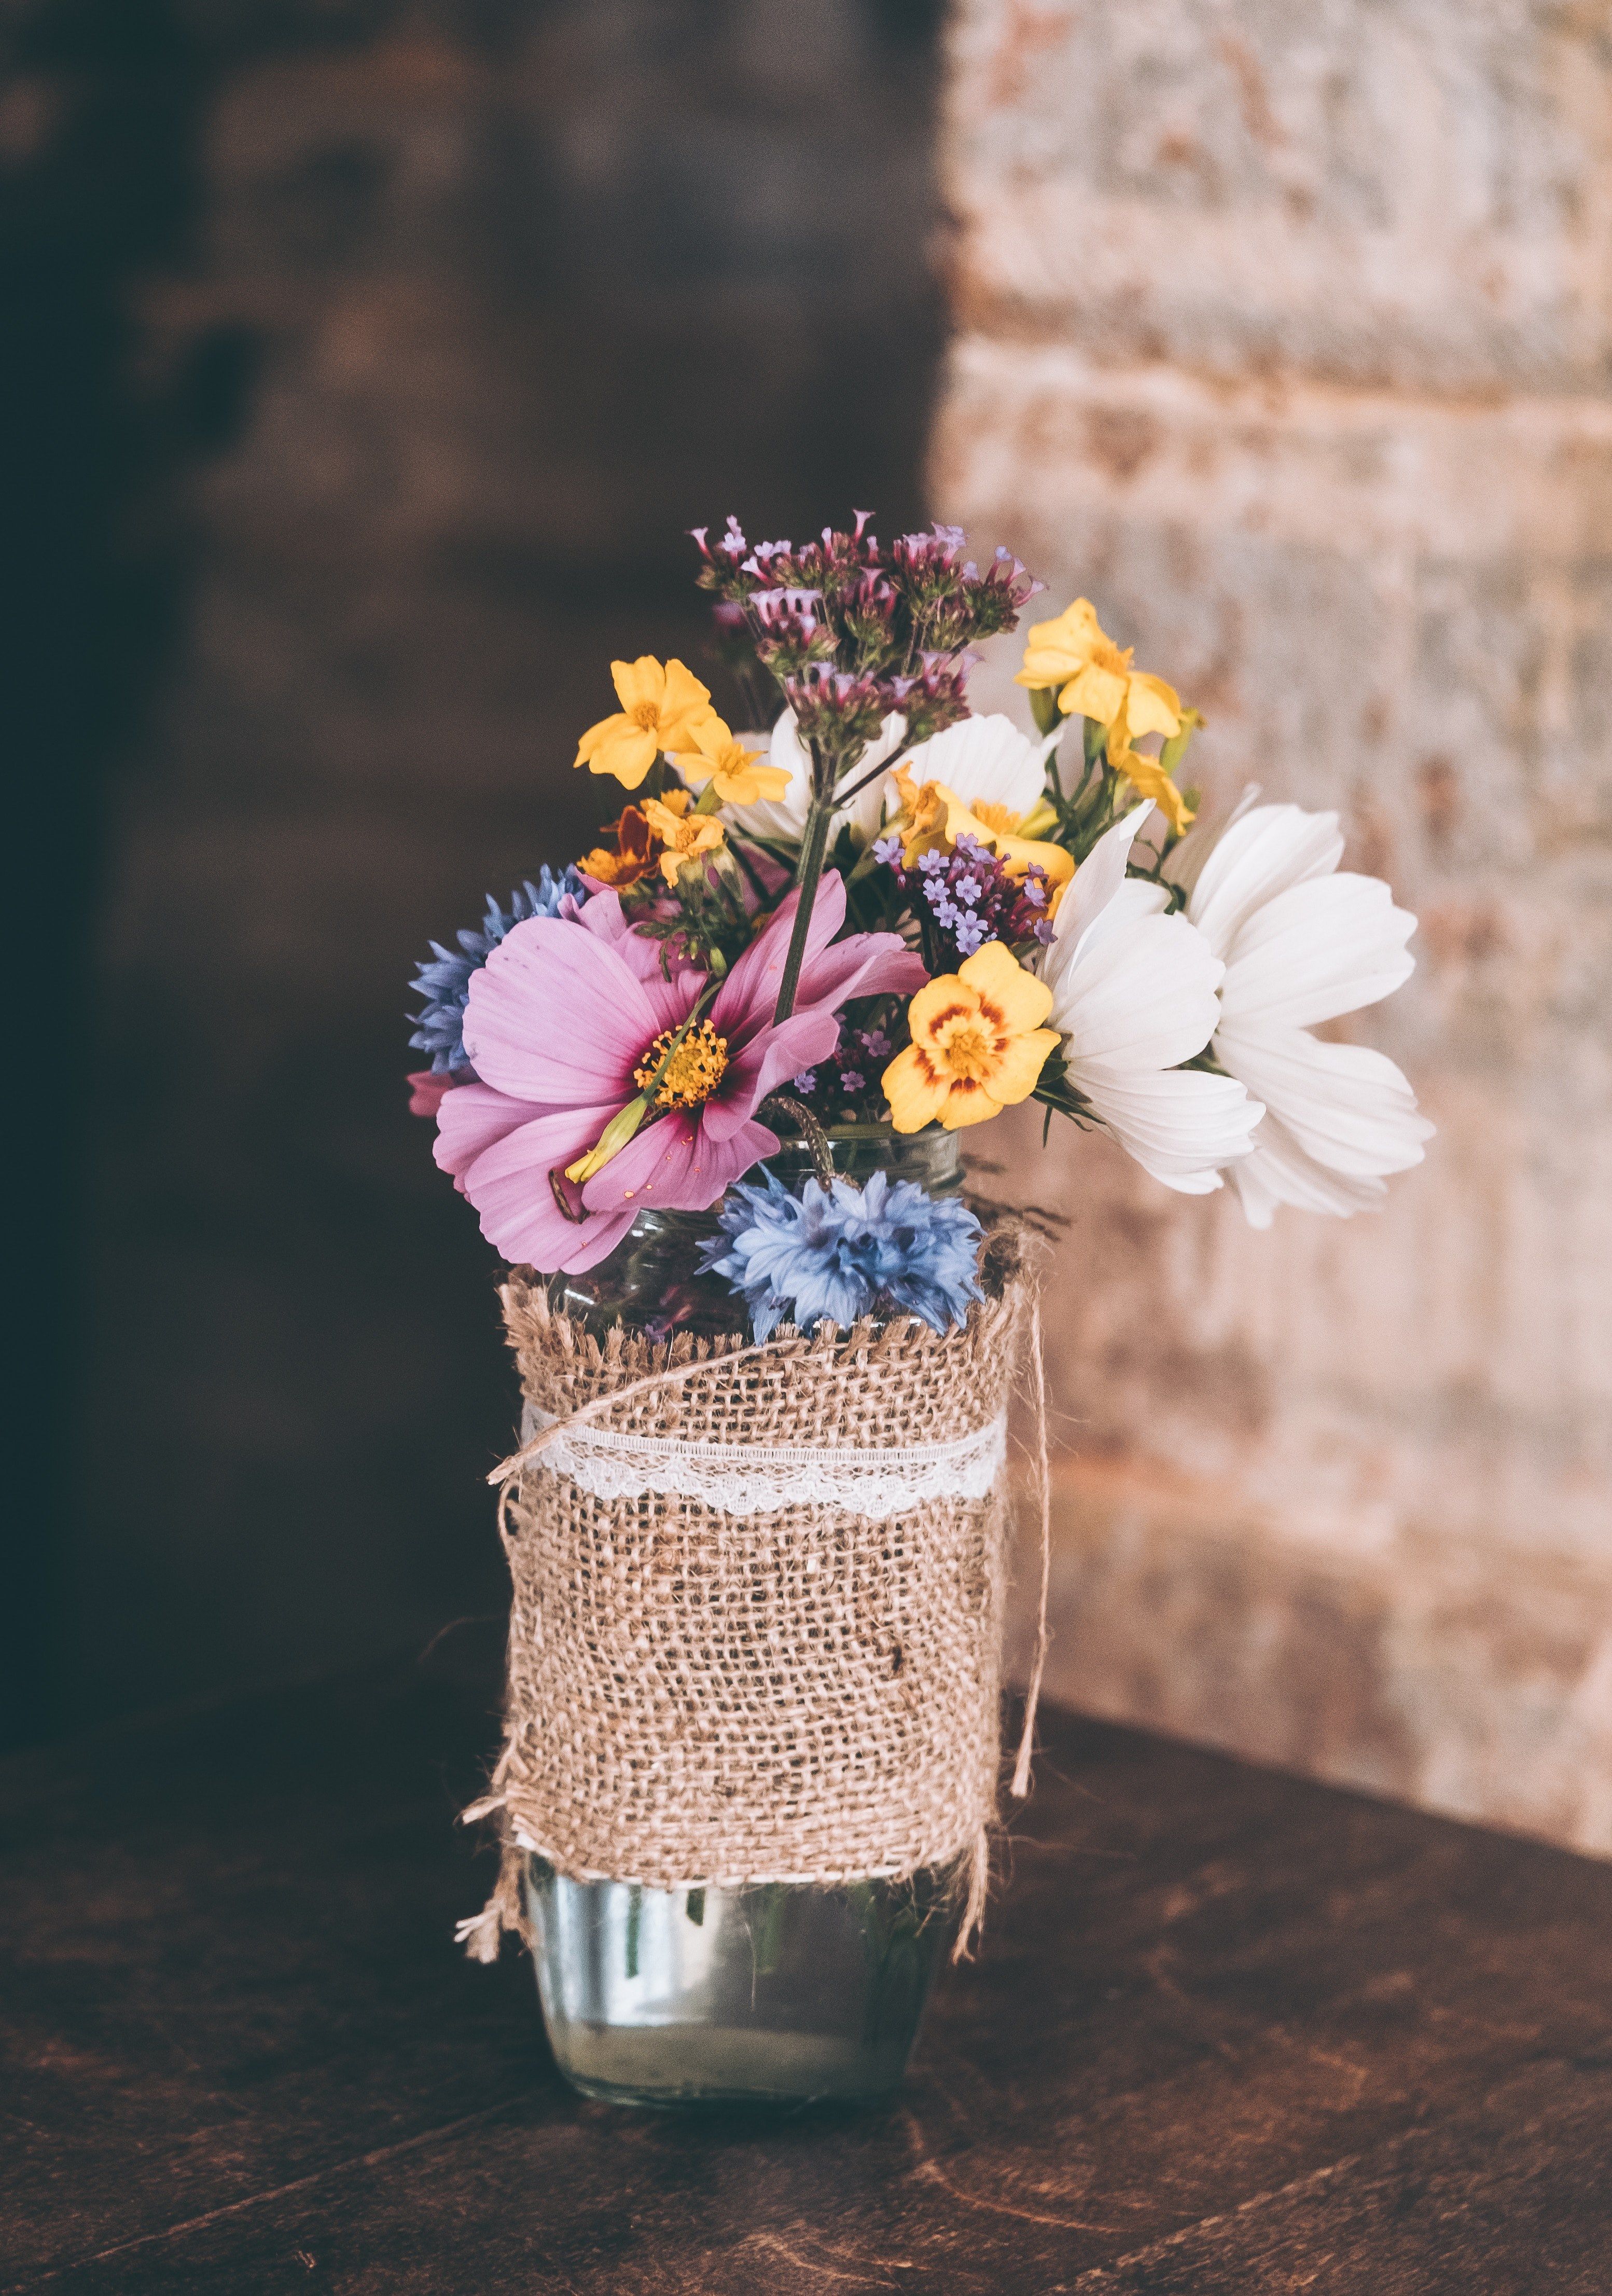 a bouquet of various flowers in a glass vase on a wooden